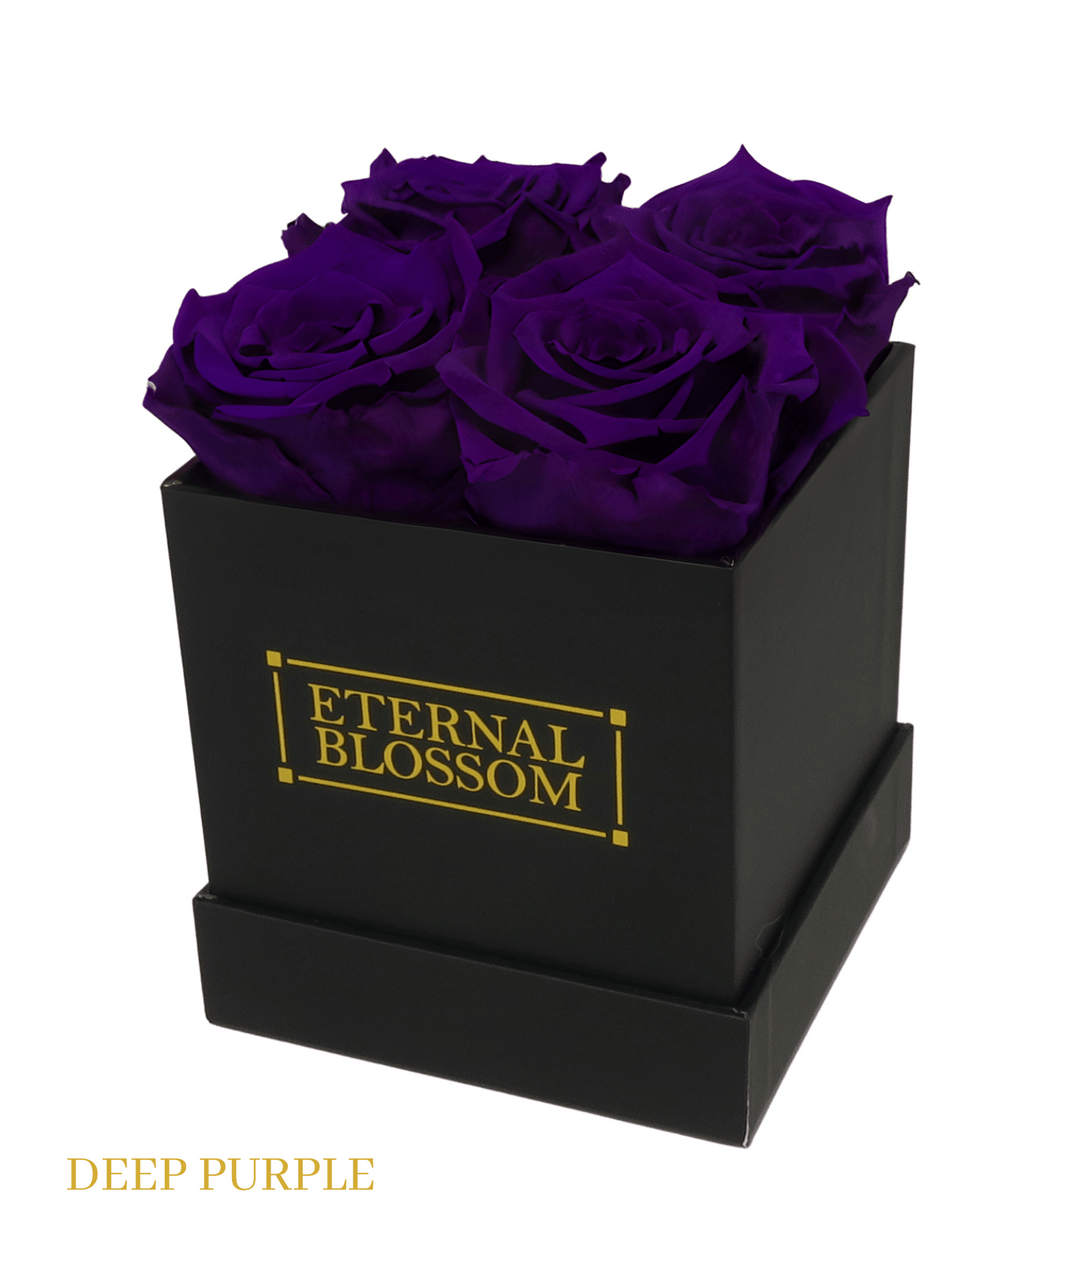 4 Piece Blossom Box - Black Box - All Colours of Year Lasting Infinity Roses